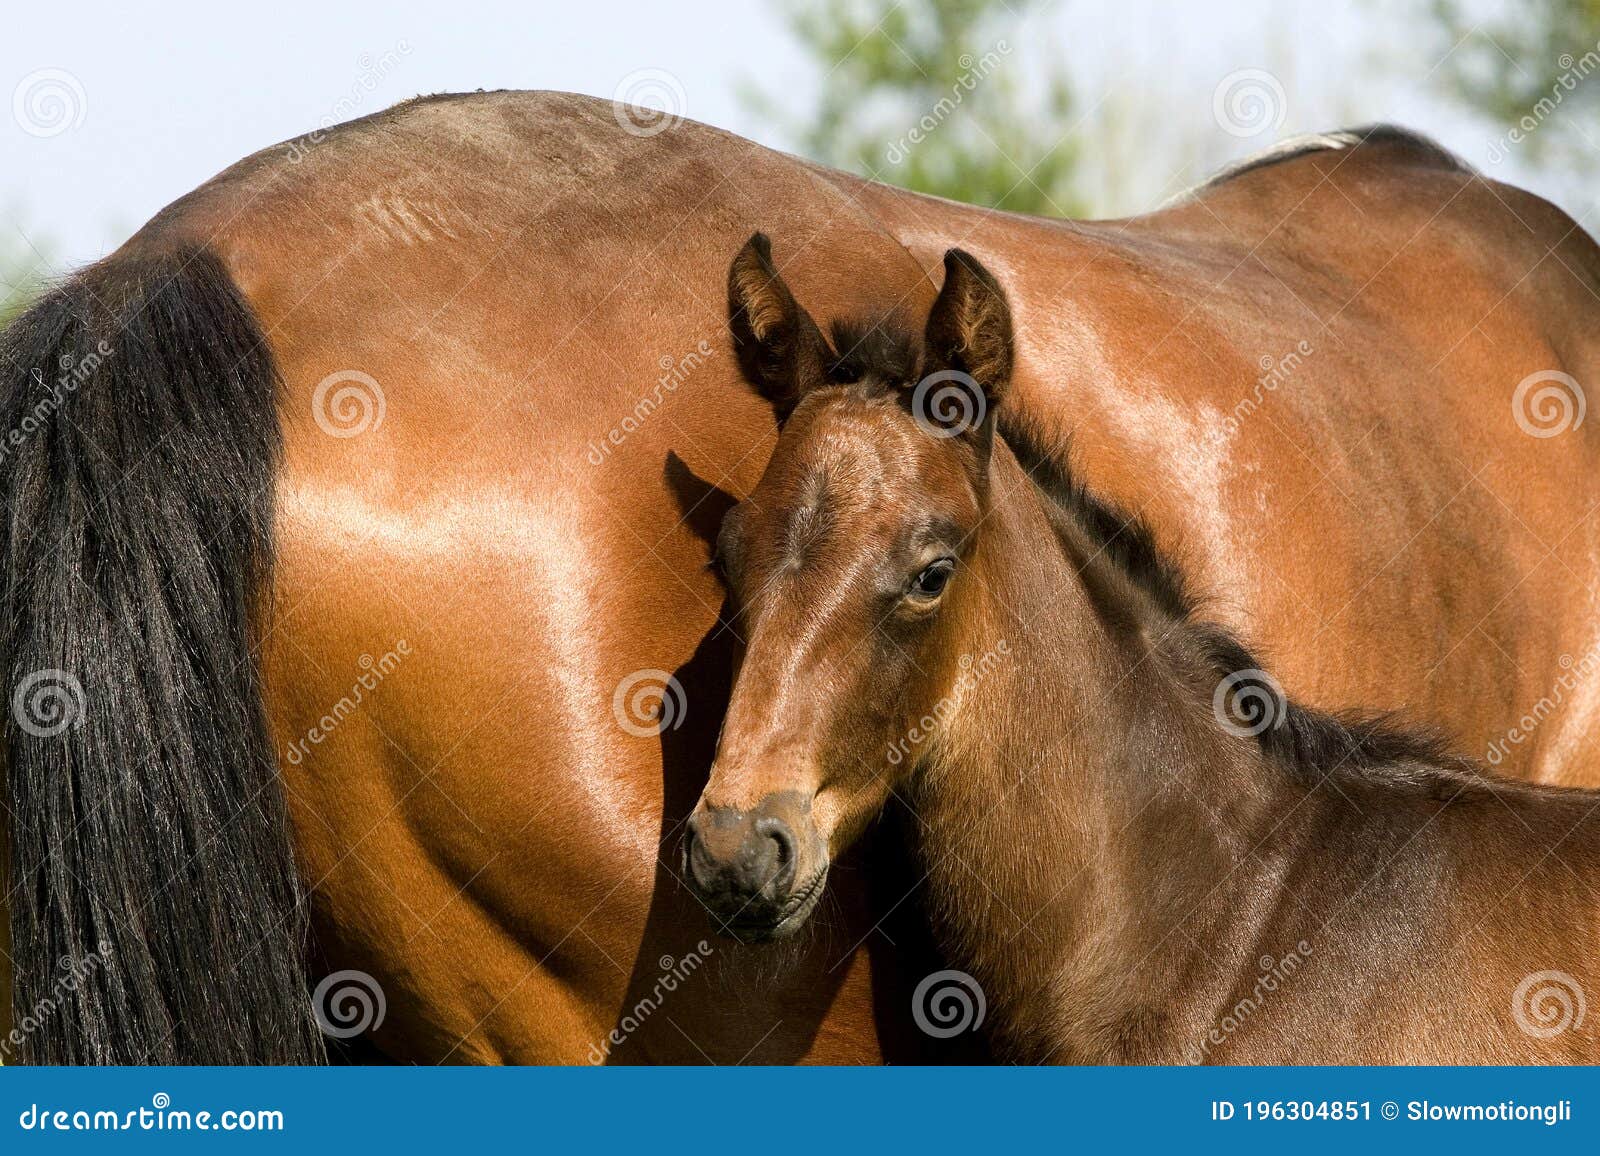 french trotter horse, mare with foal, normandy